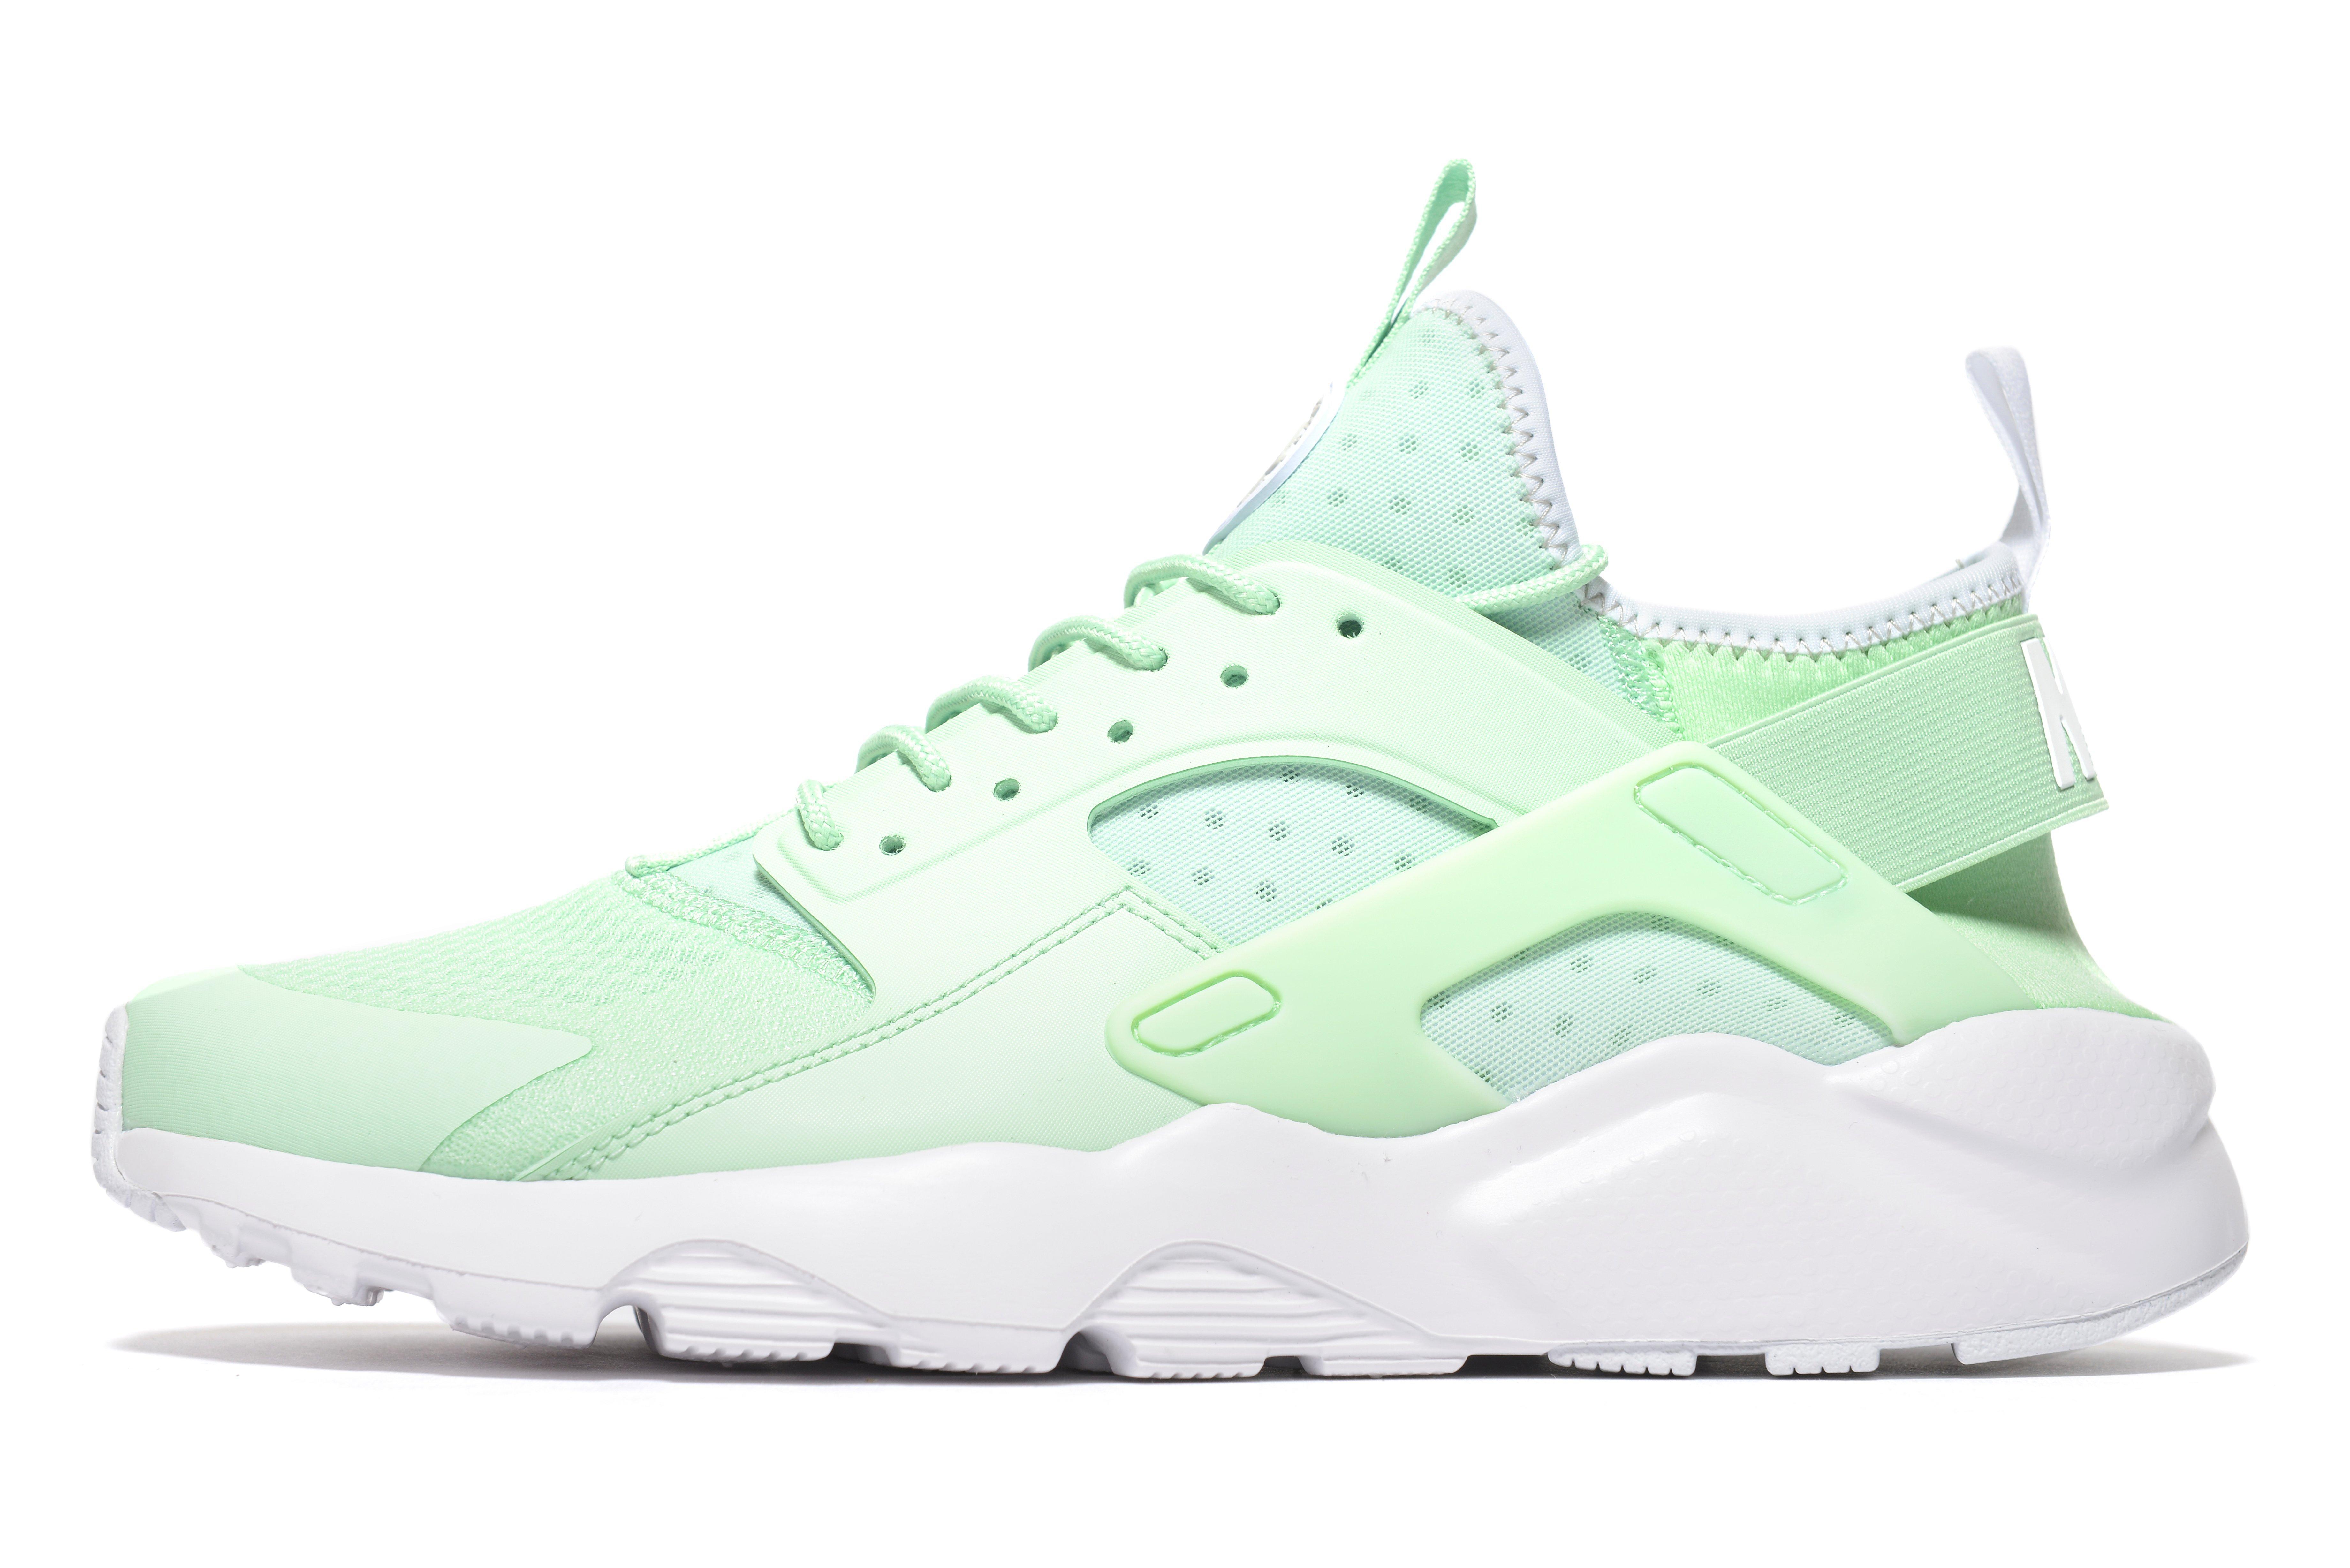 Green Huaraches Hotsell, SAVE 59% - aveclumiere.com